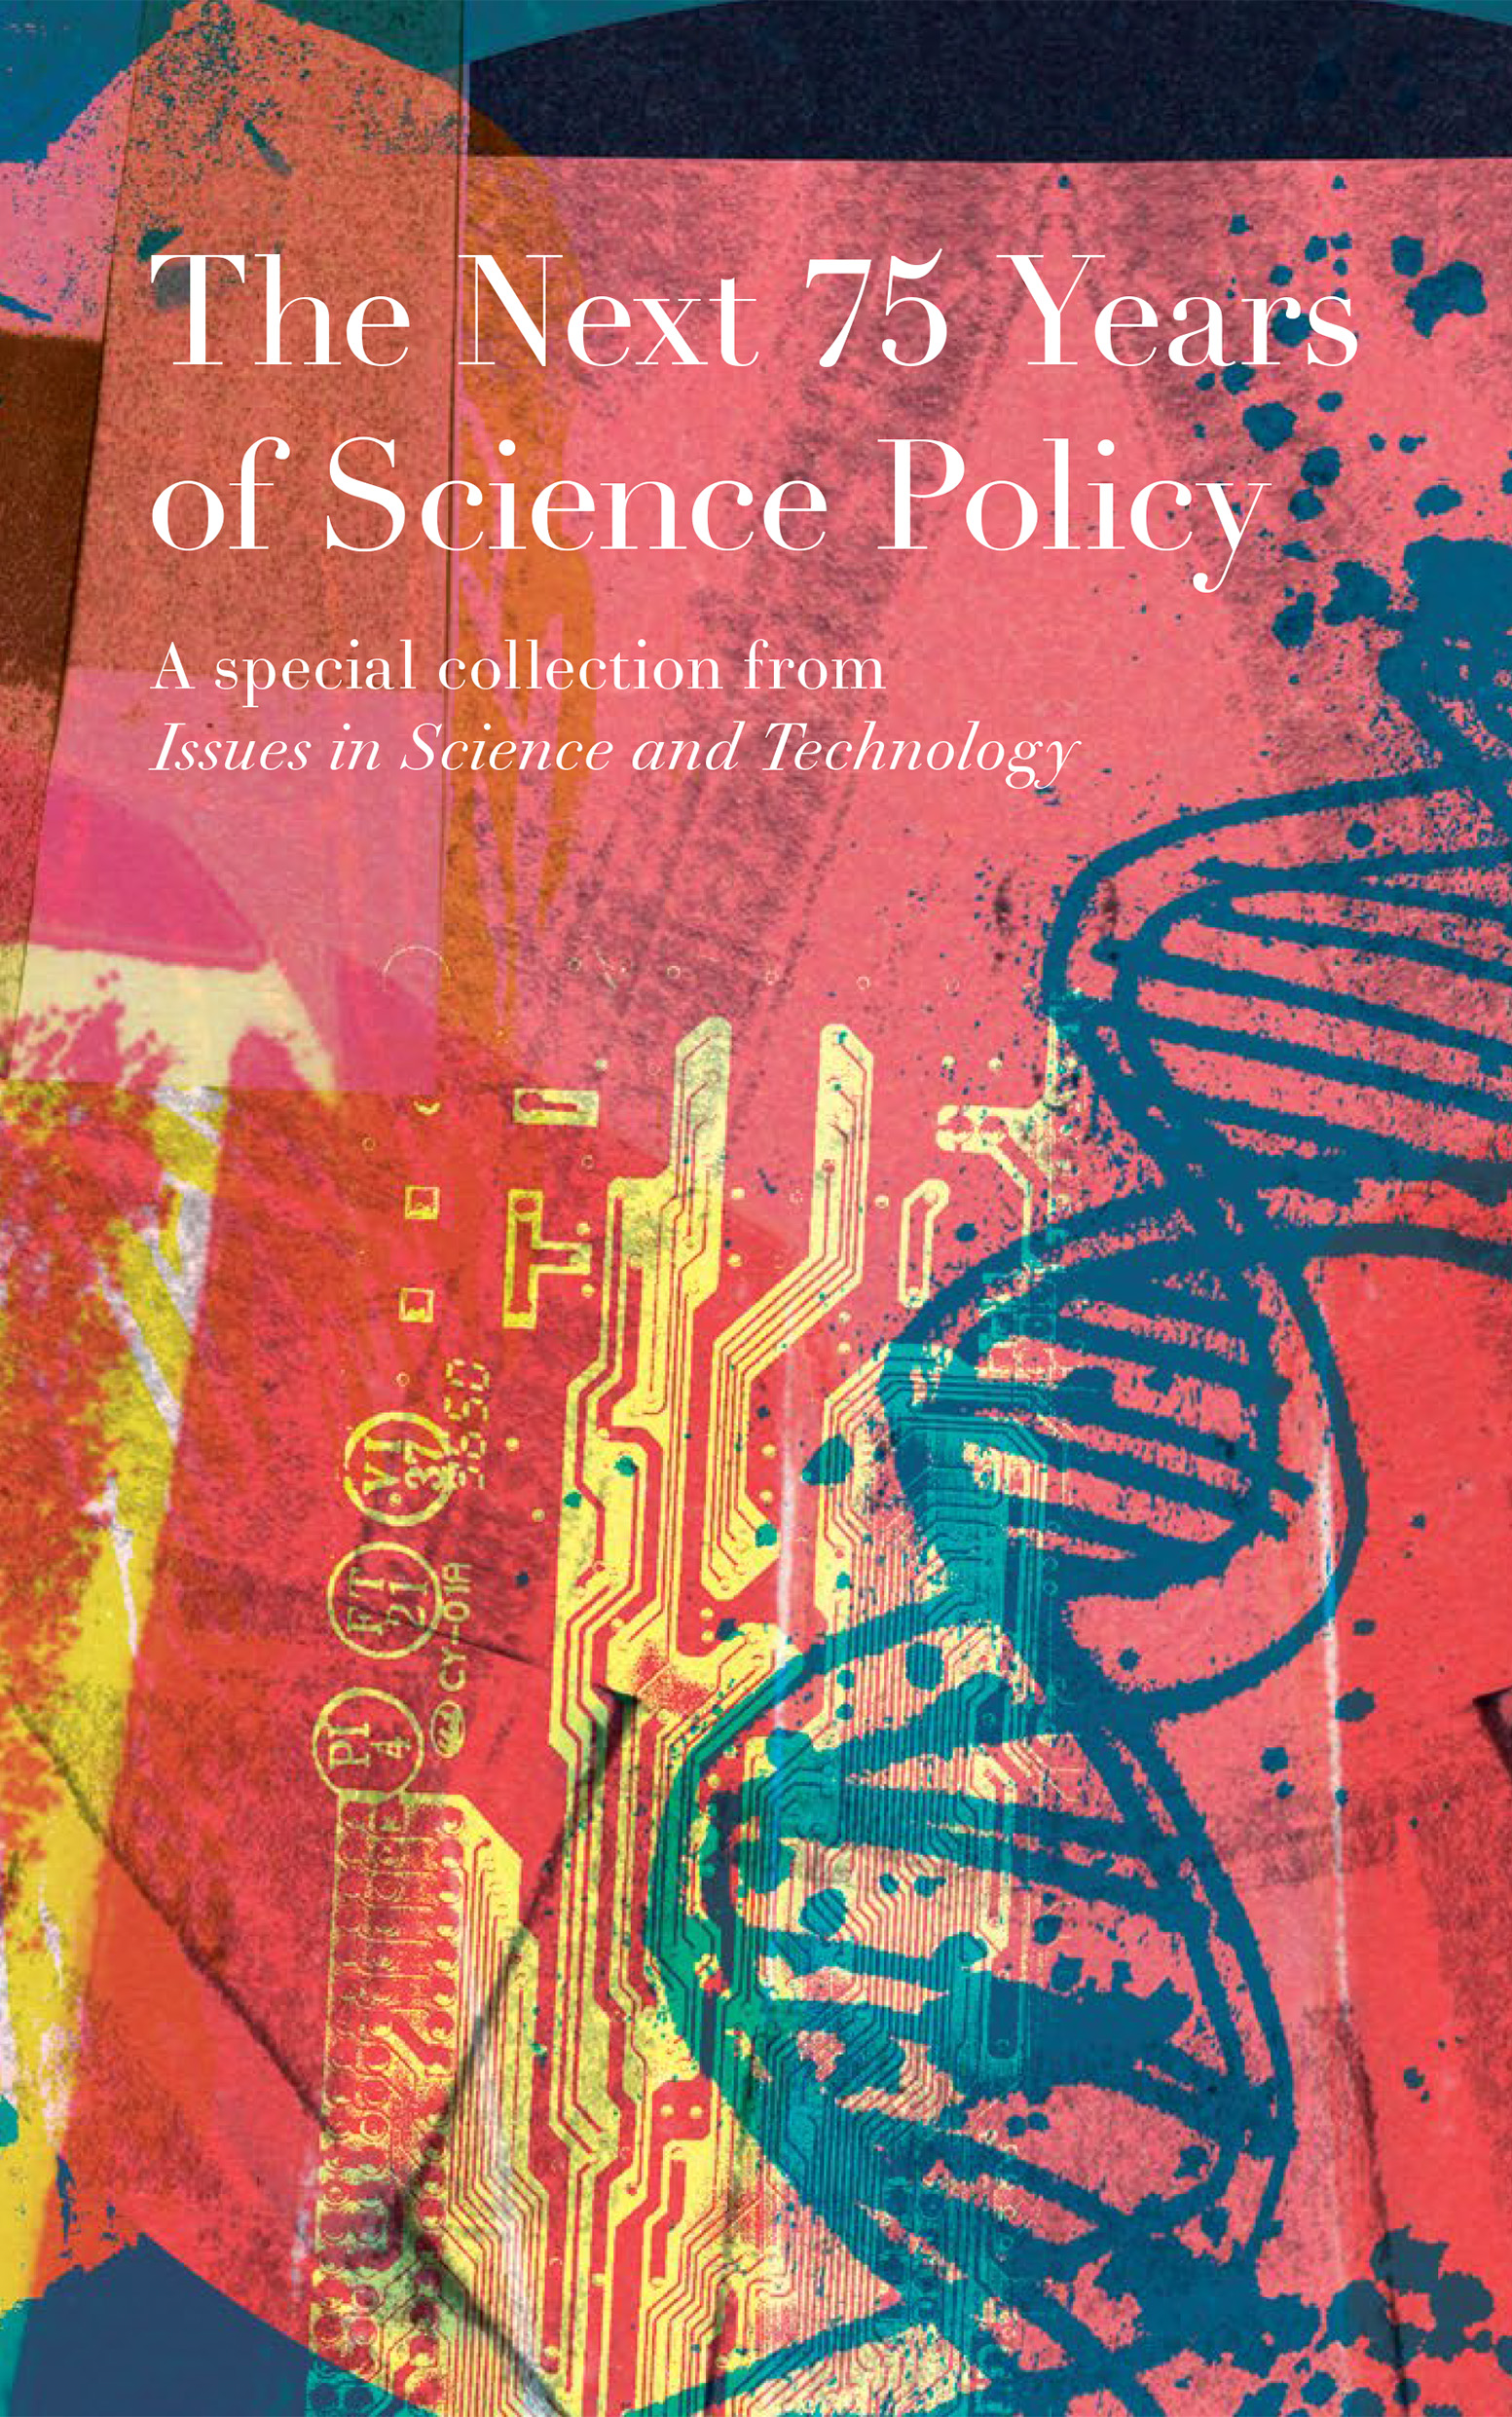 Book cover for "The Next 75 Years of Science Policy"